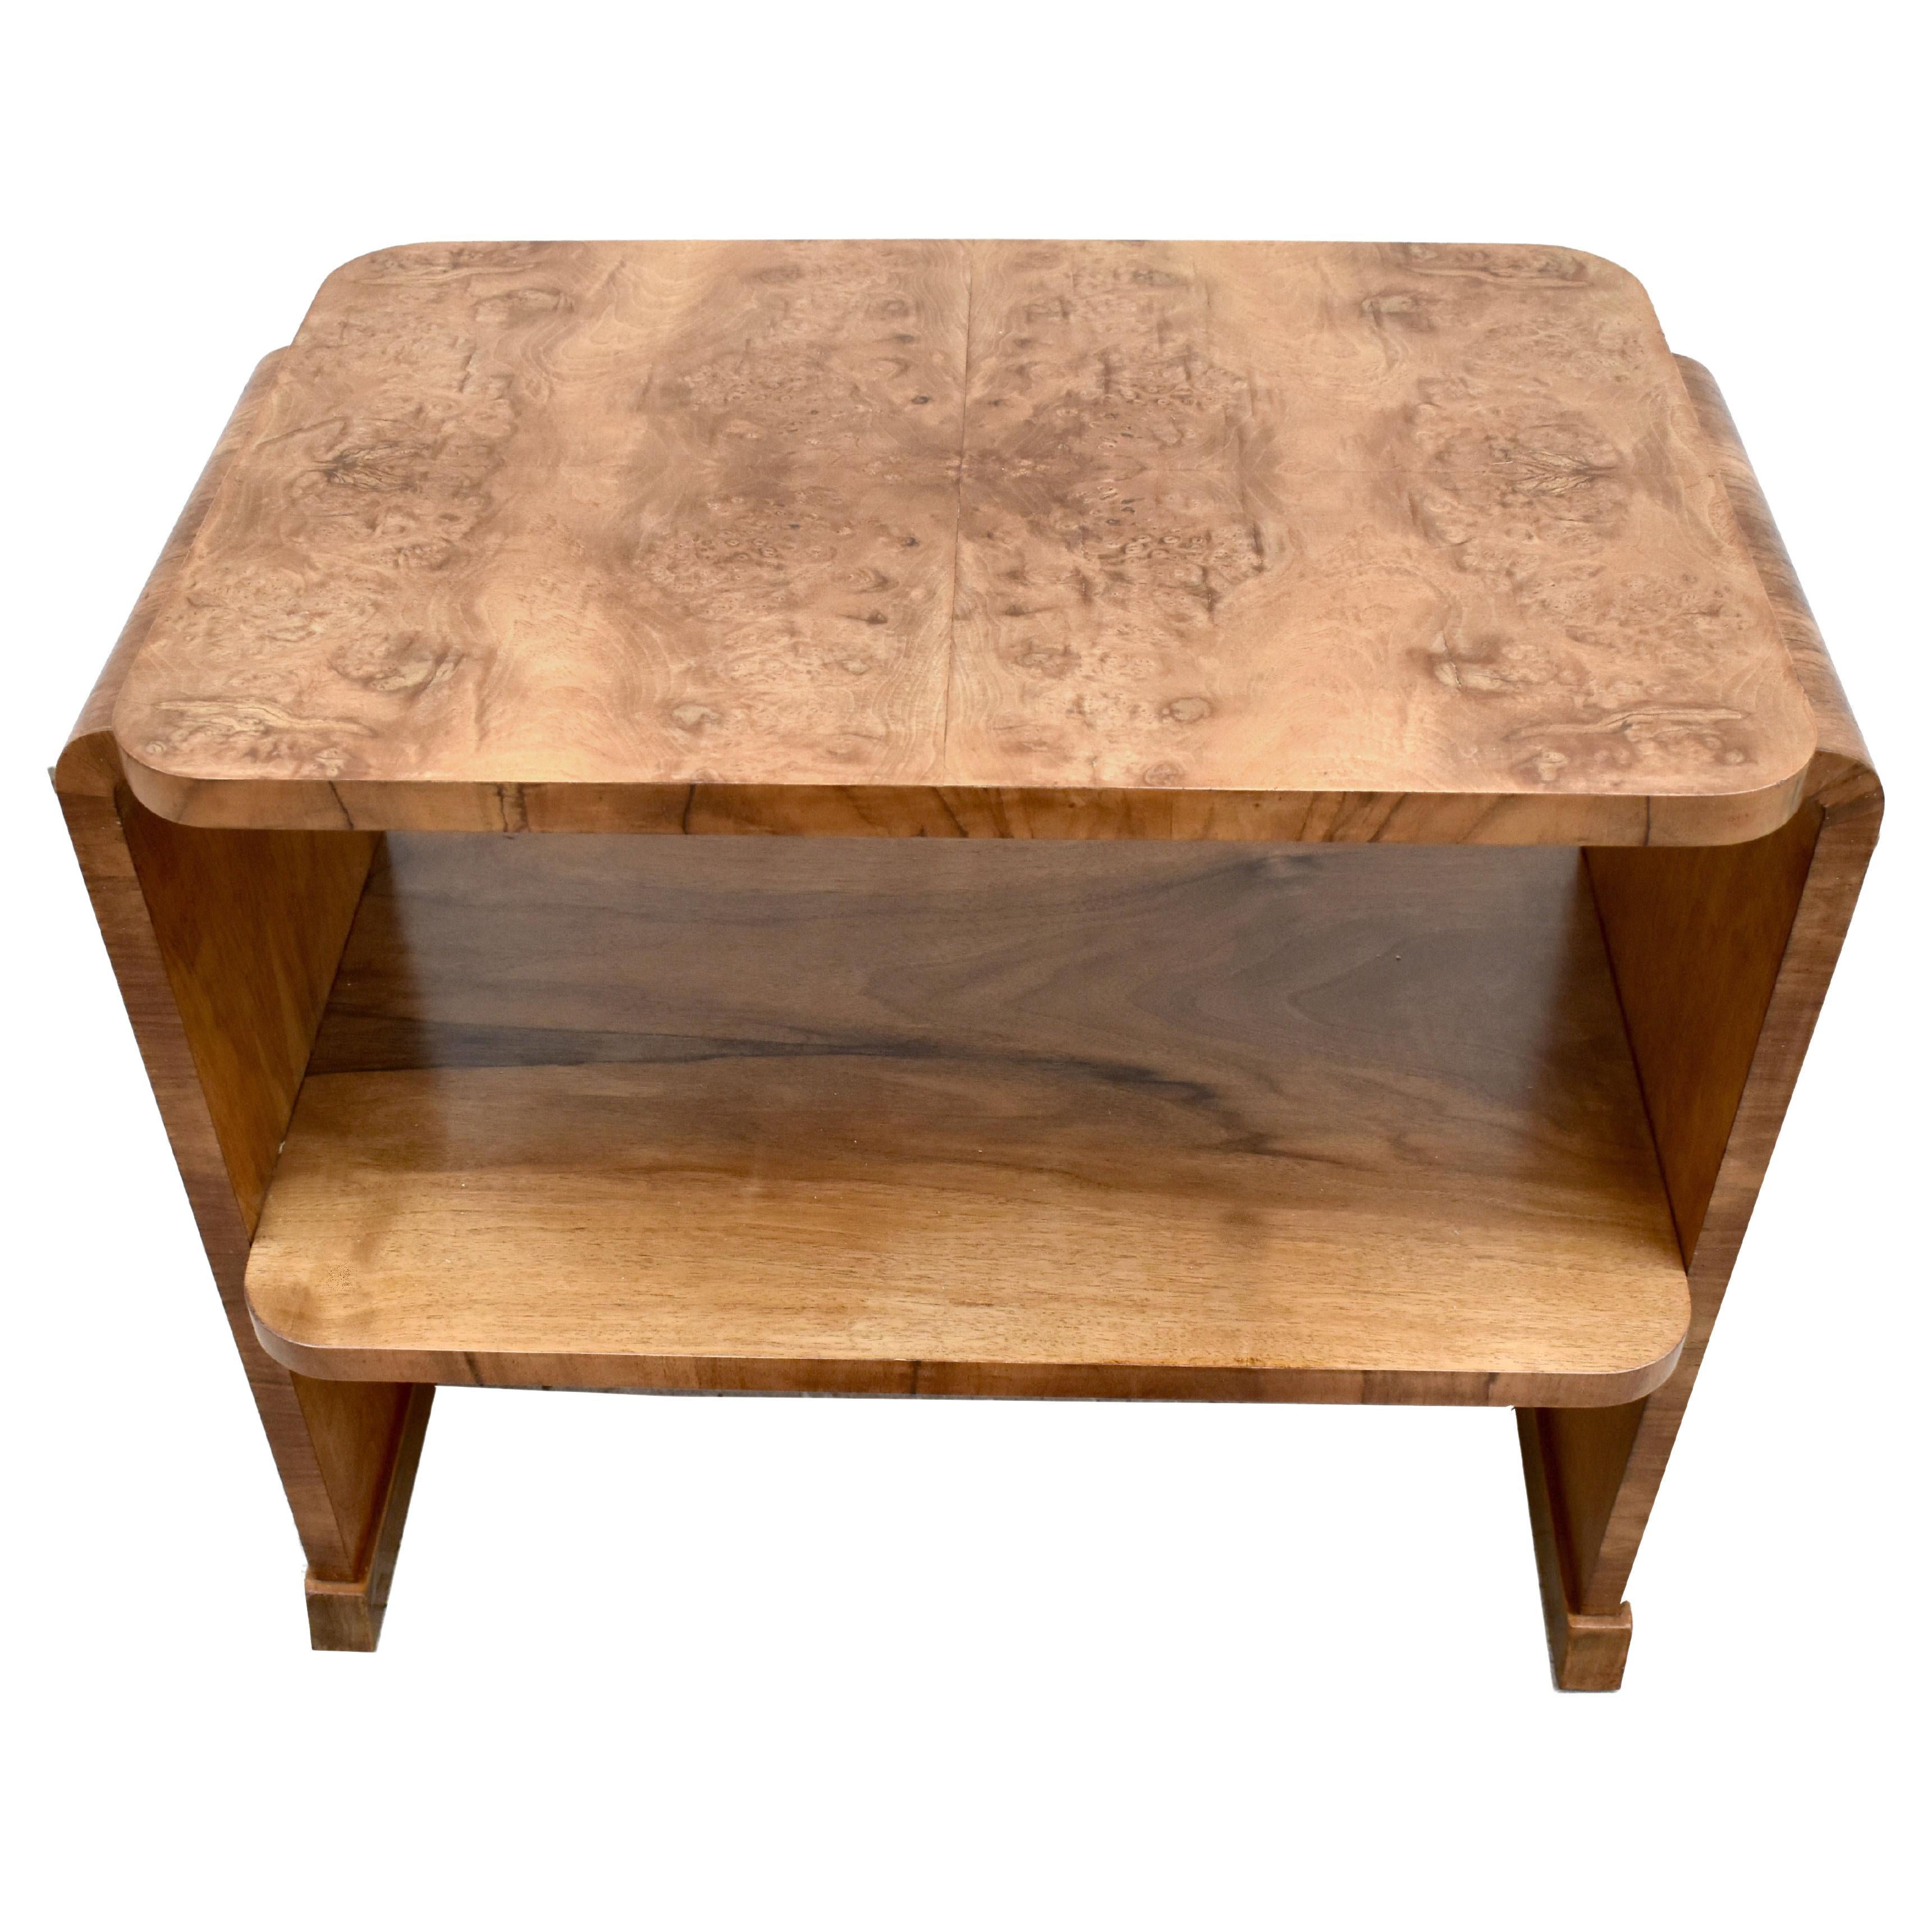 Exceptional quality Art Deco burl walnut honey tone occasional table dating to the 1930s. Superb shape and really good size for modern day use. Two tier so ideal for using as a book or magazine table. Very sturdy and solid piece of furniture. We've